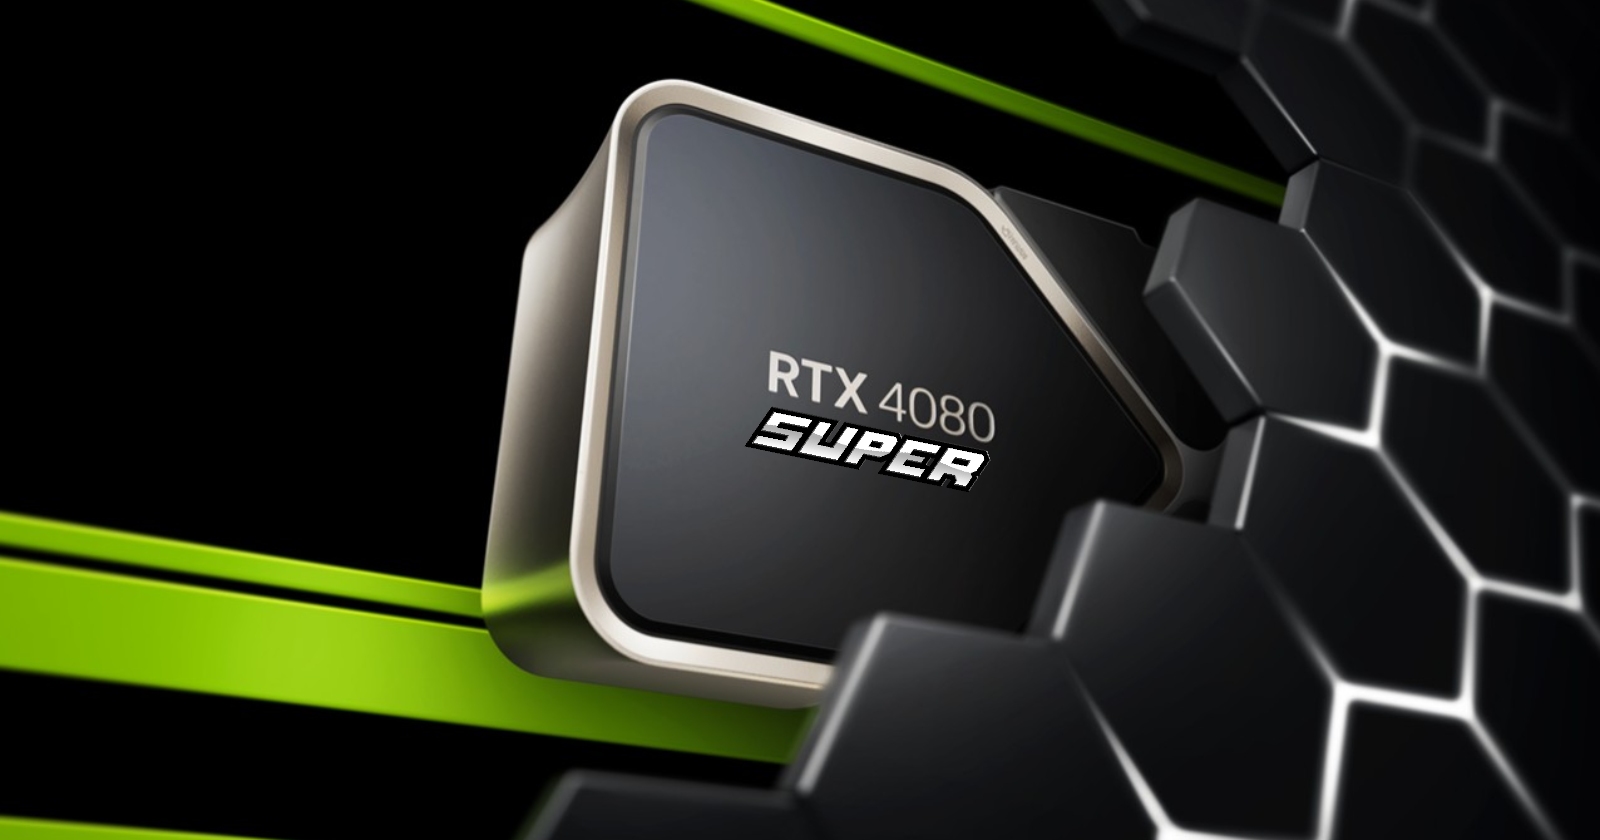 NVIDIA’s RTX 4080 SUPER sells out! Prices are rising